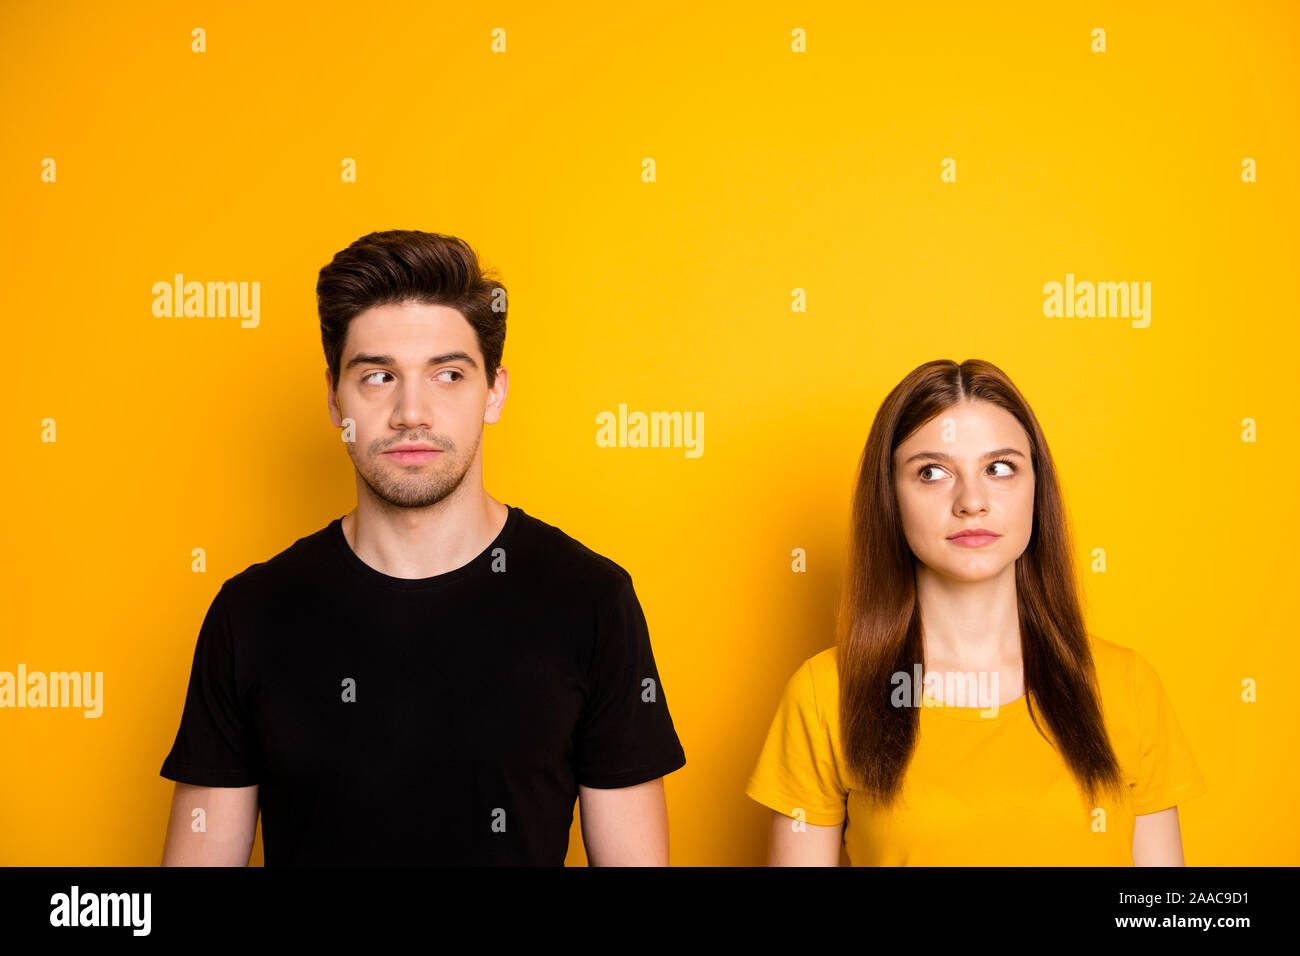 Photo of suspicious thinking pondering couple uncertain about each other looking suspiciously suspecting isolated over vibrant shiny color background Stock Photo